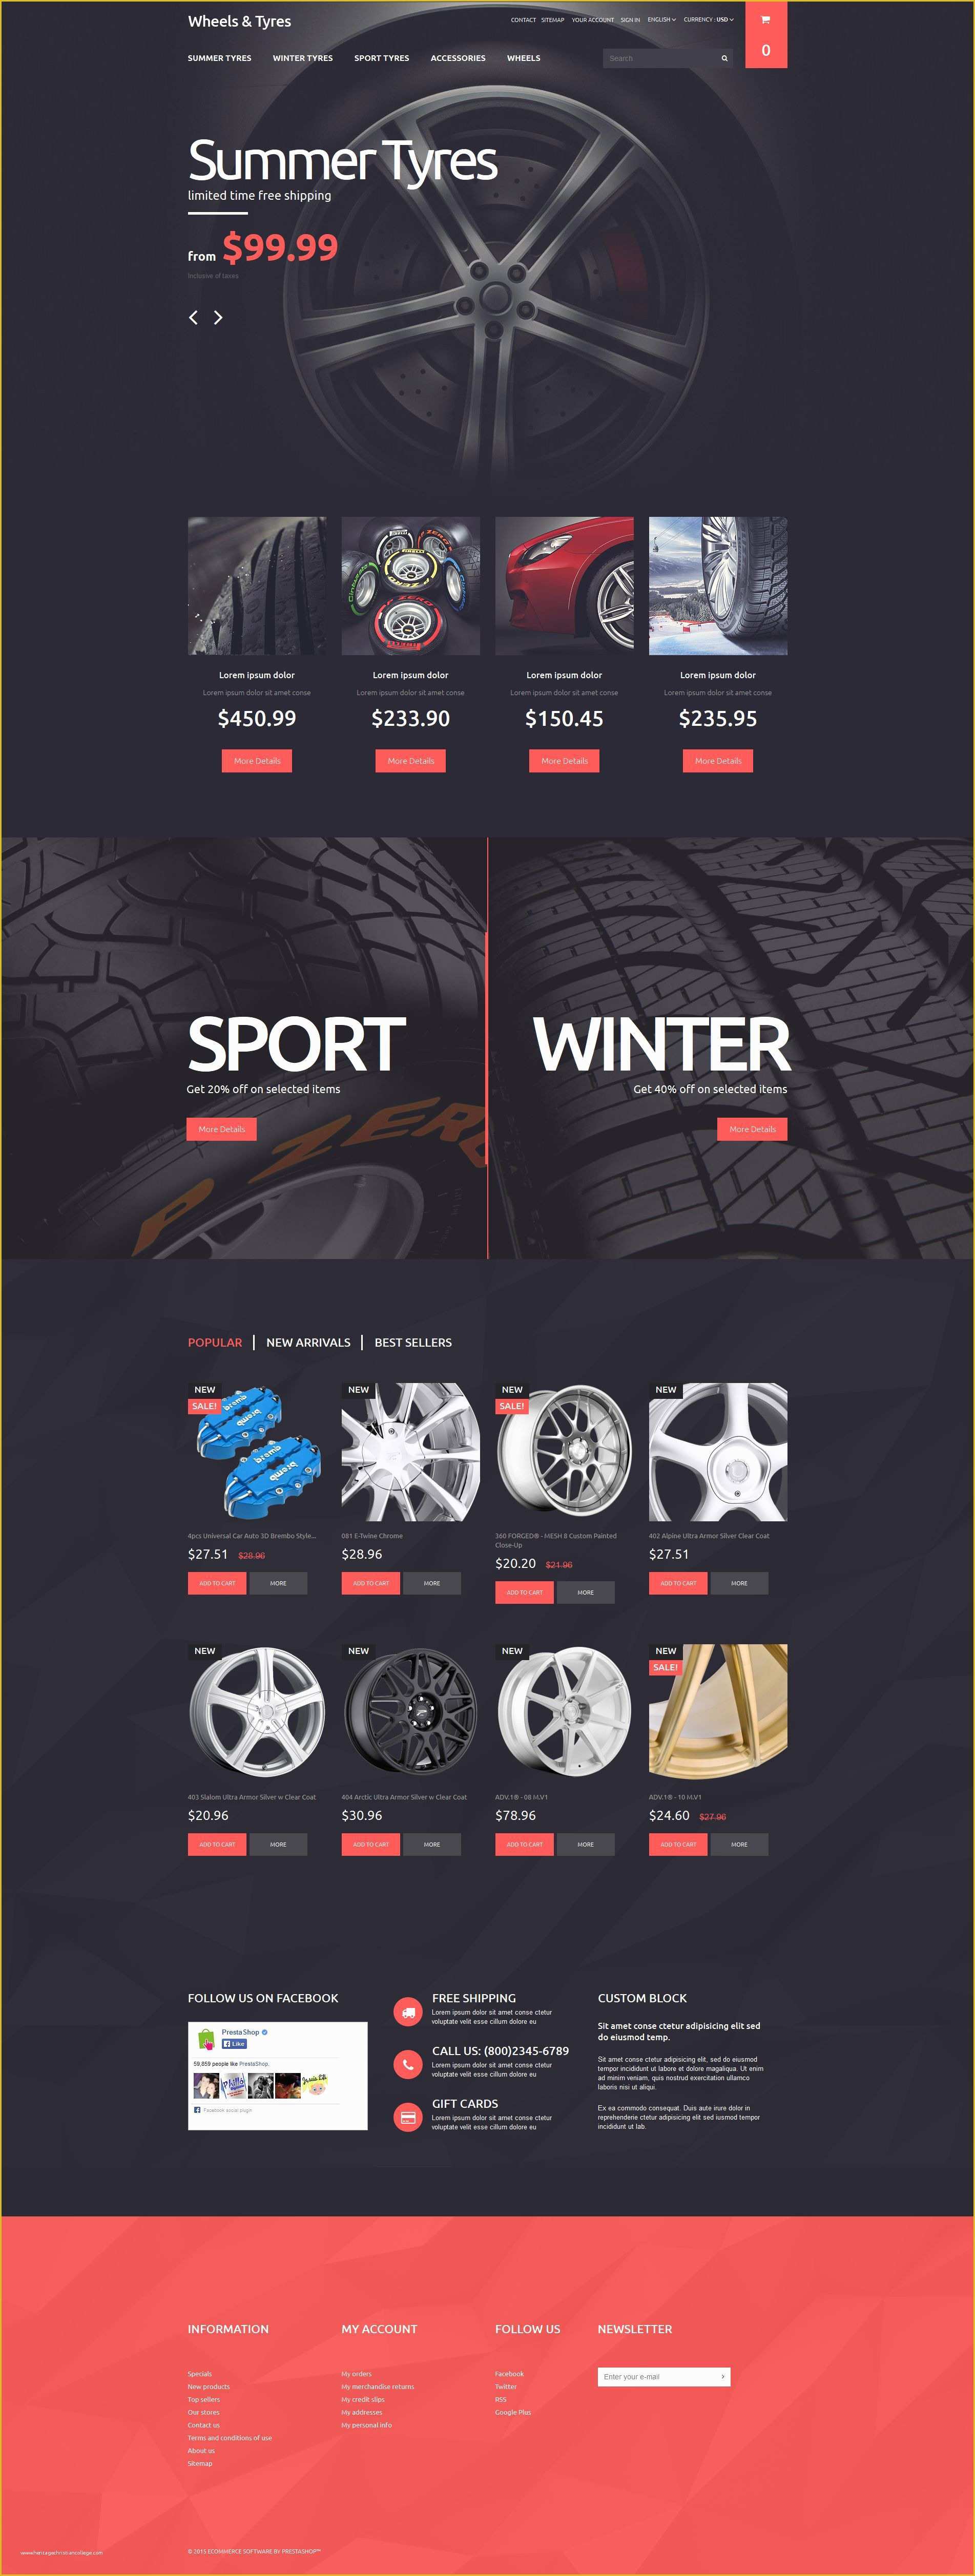 Tyre Website Template Free Download Of Wheels and Tyres Prestashop theme